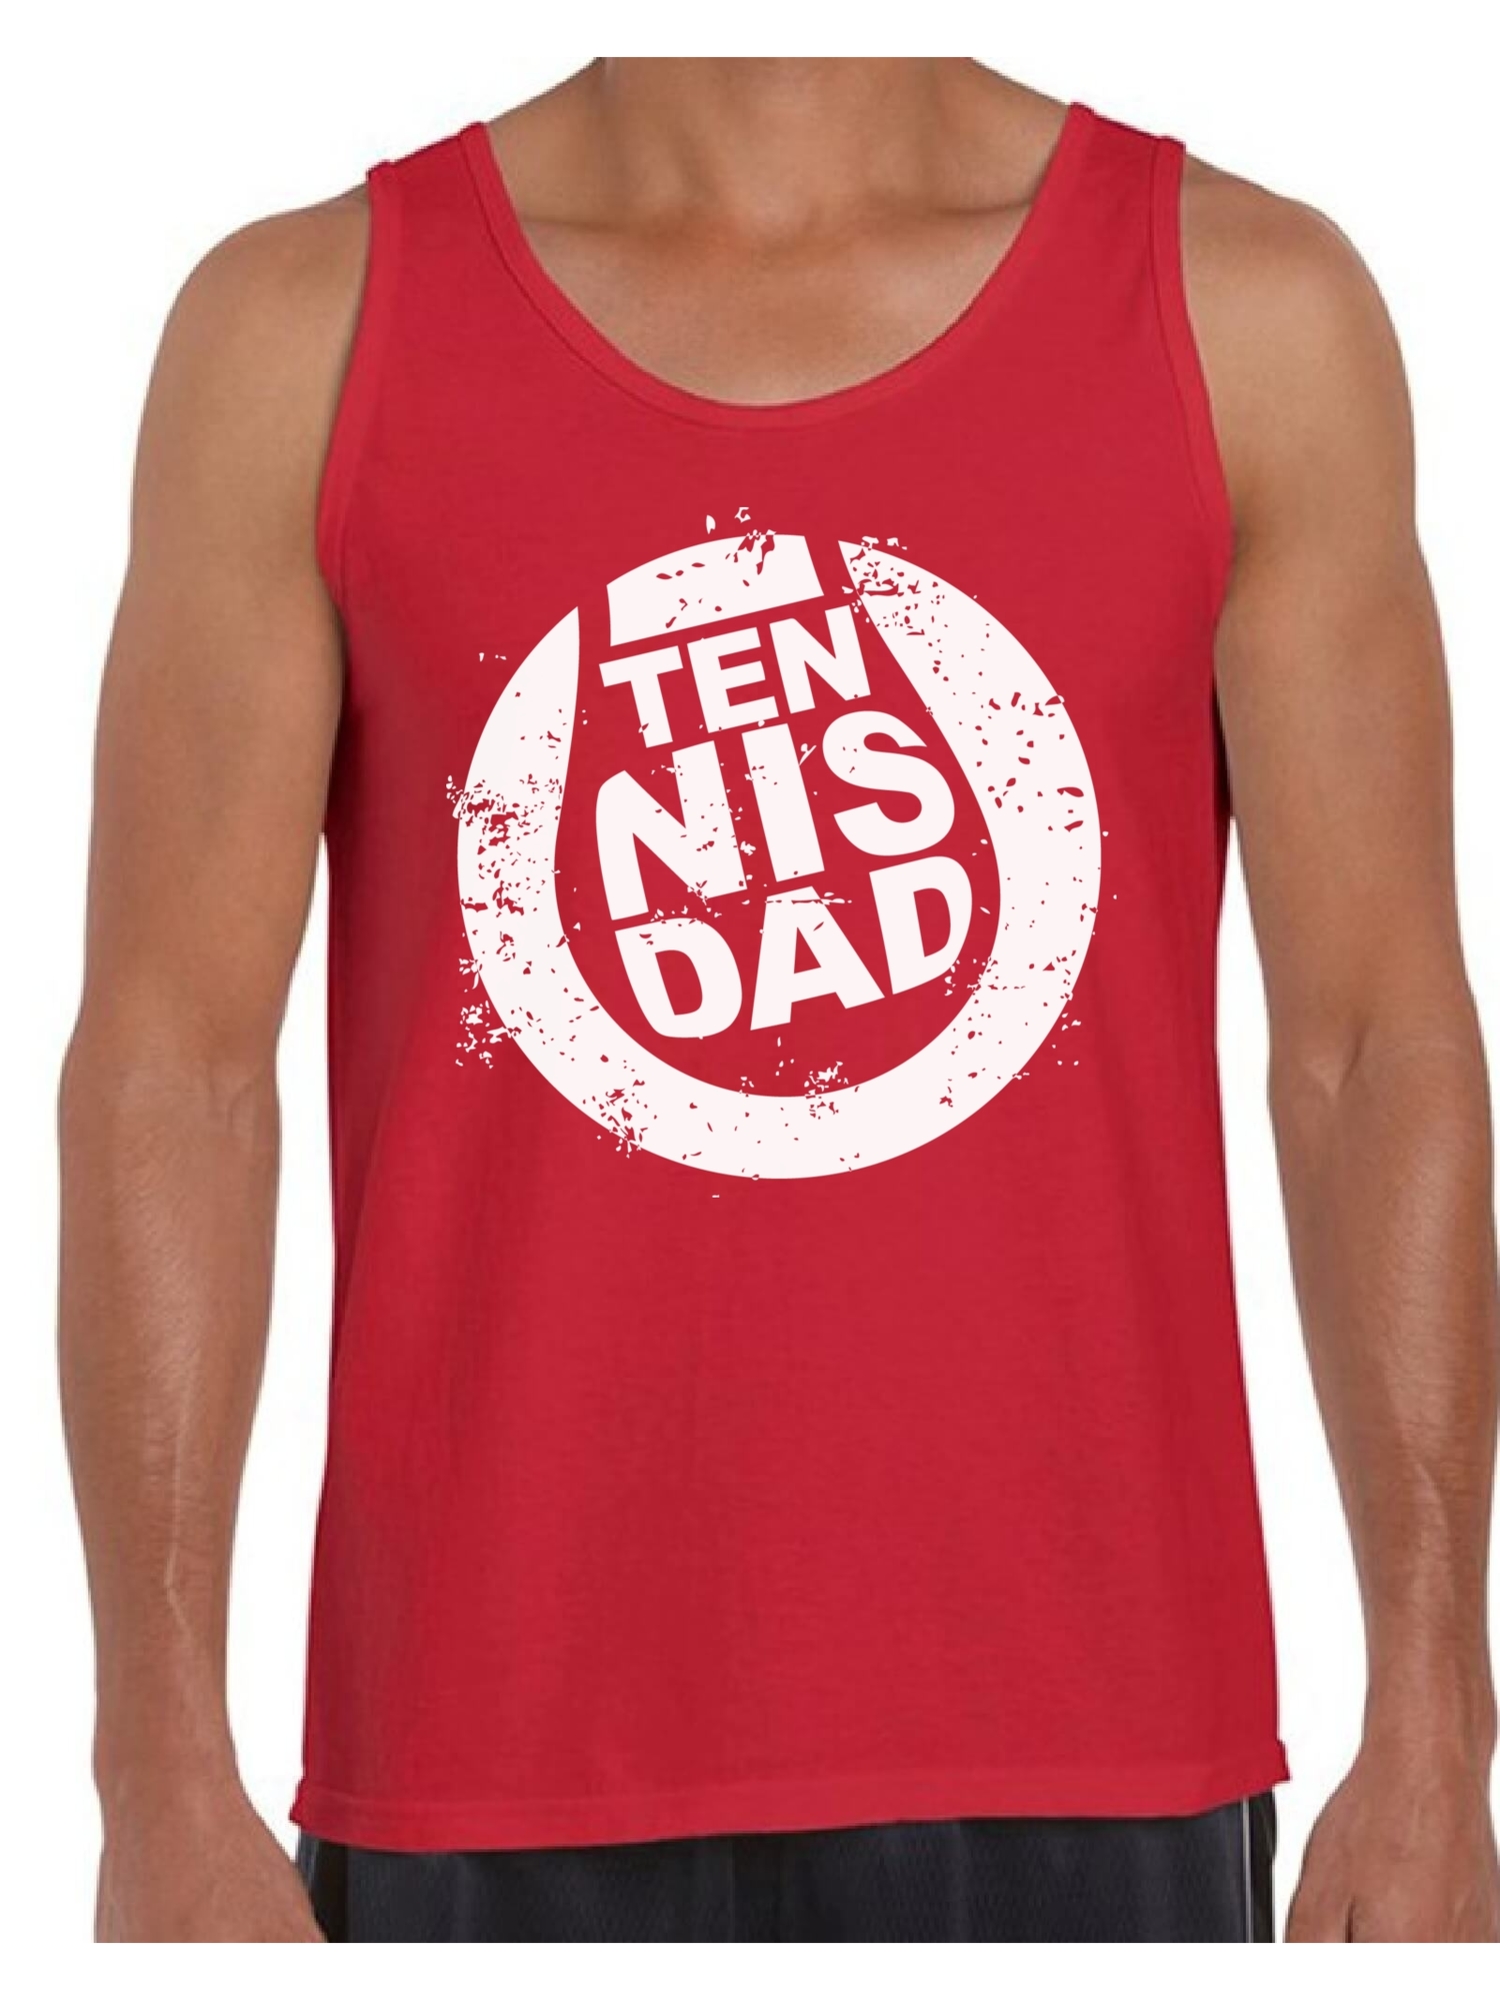 Awkward Styles Men's Tennis Dad Graphic Tank Tops Vintage Tennis Player Sport Dad Father`s Day Gift - image 1 of 4